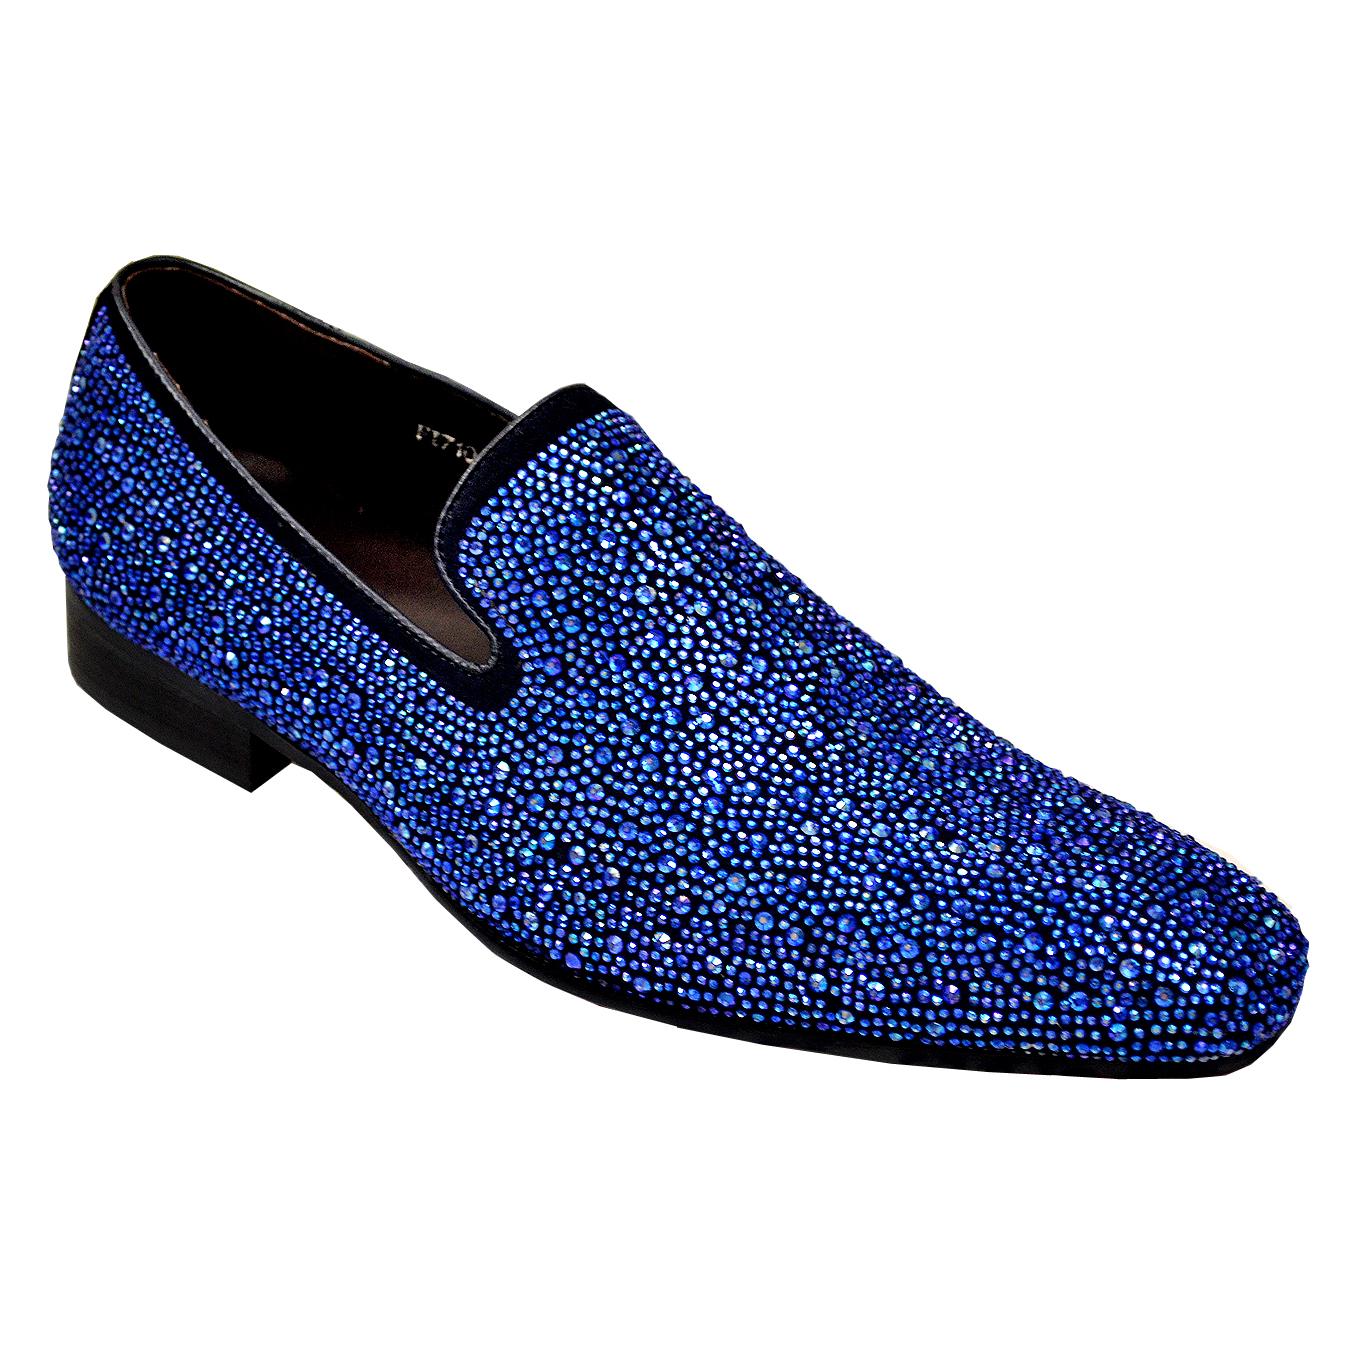 Fiesso Navy / Royal Blue Rhinestone Encrusted Leather Loafers FI7101 ...